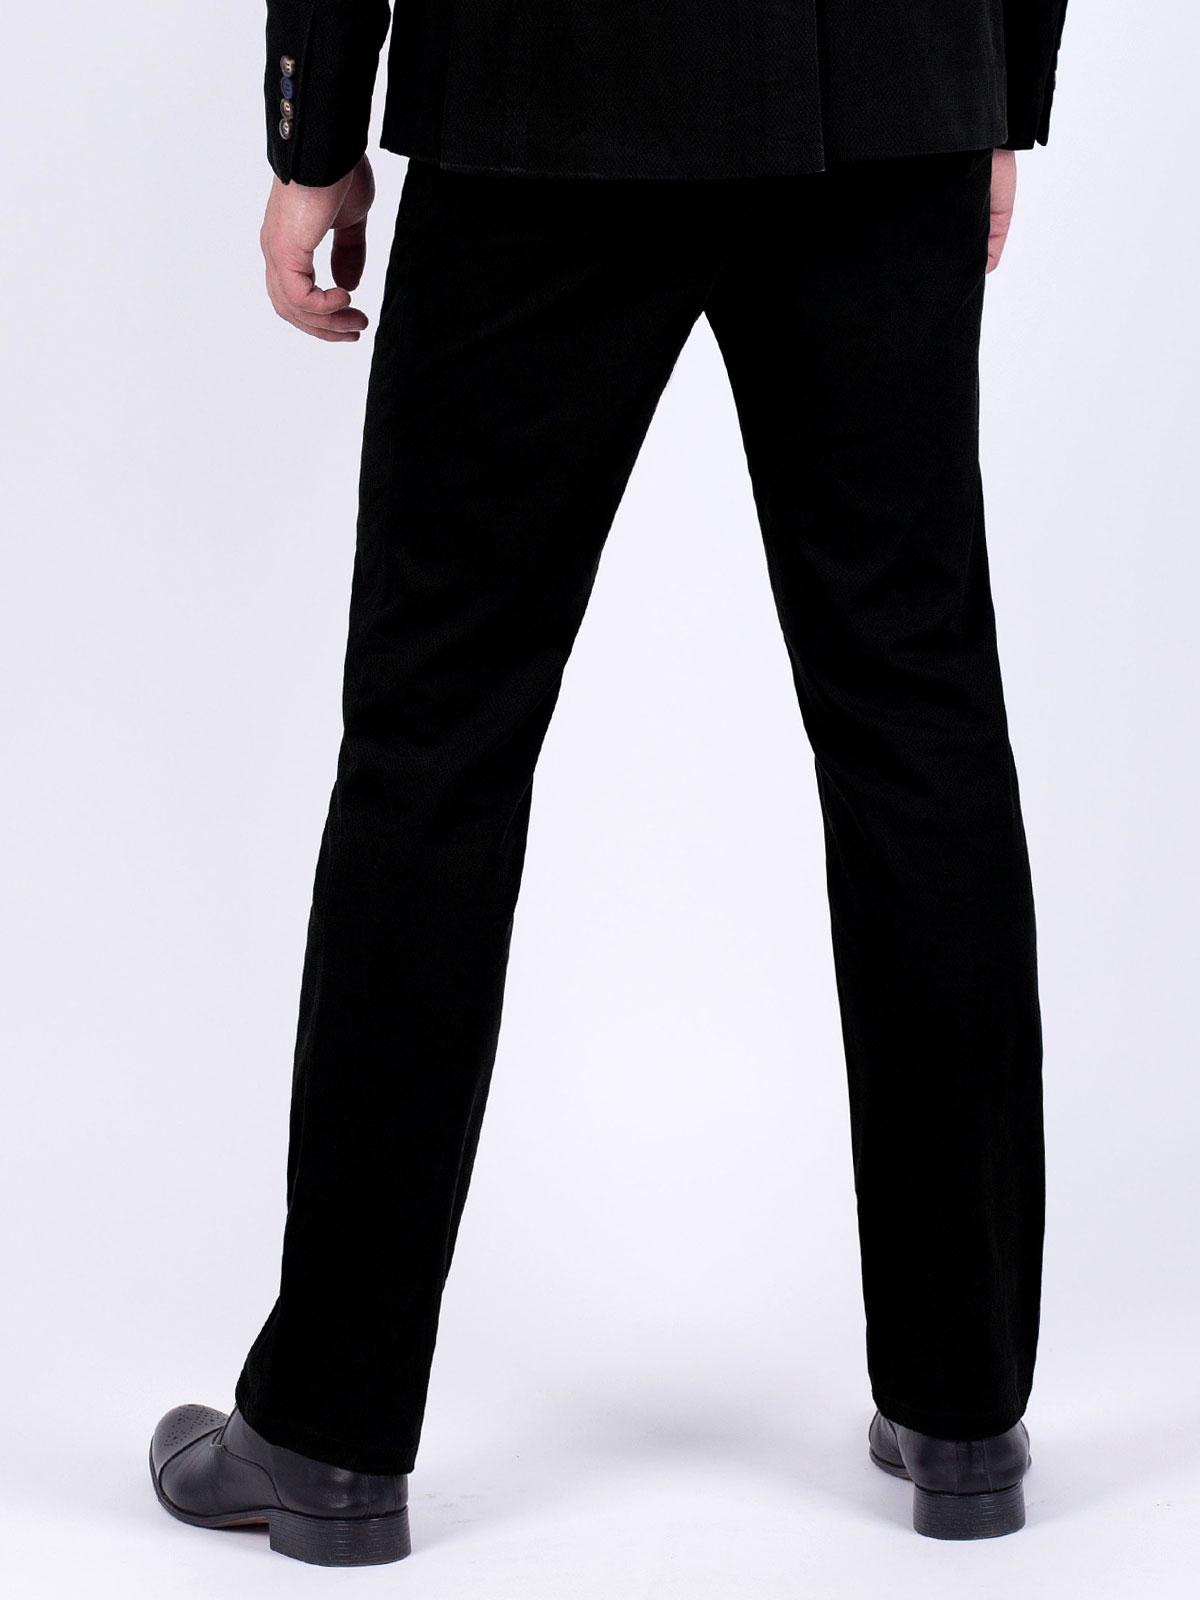 Elegant black fitted trousers - 60234 € 14.06 img2